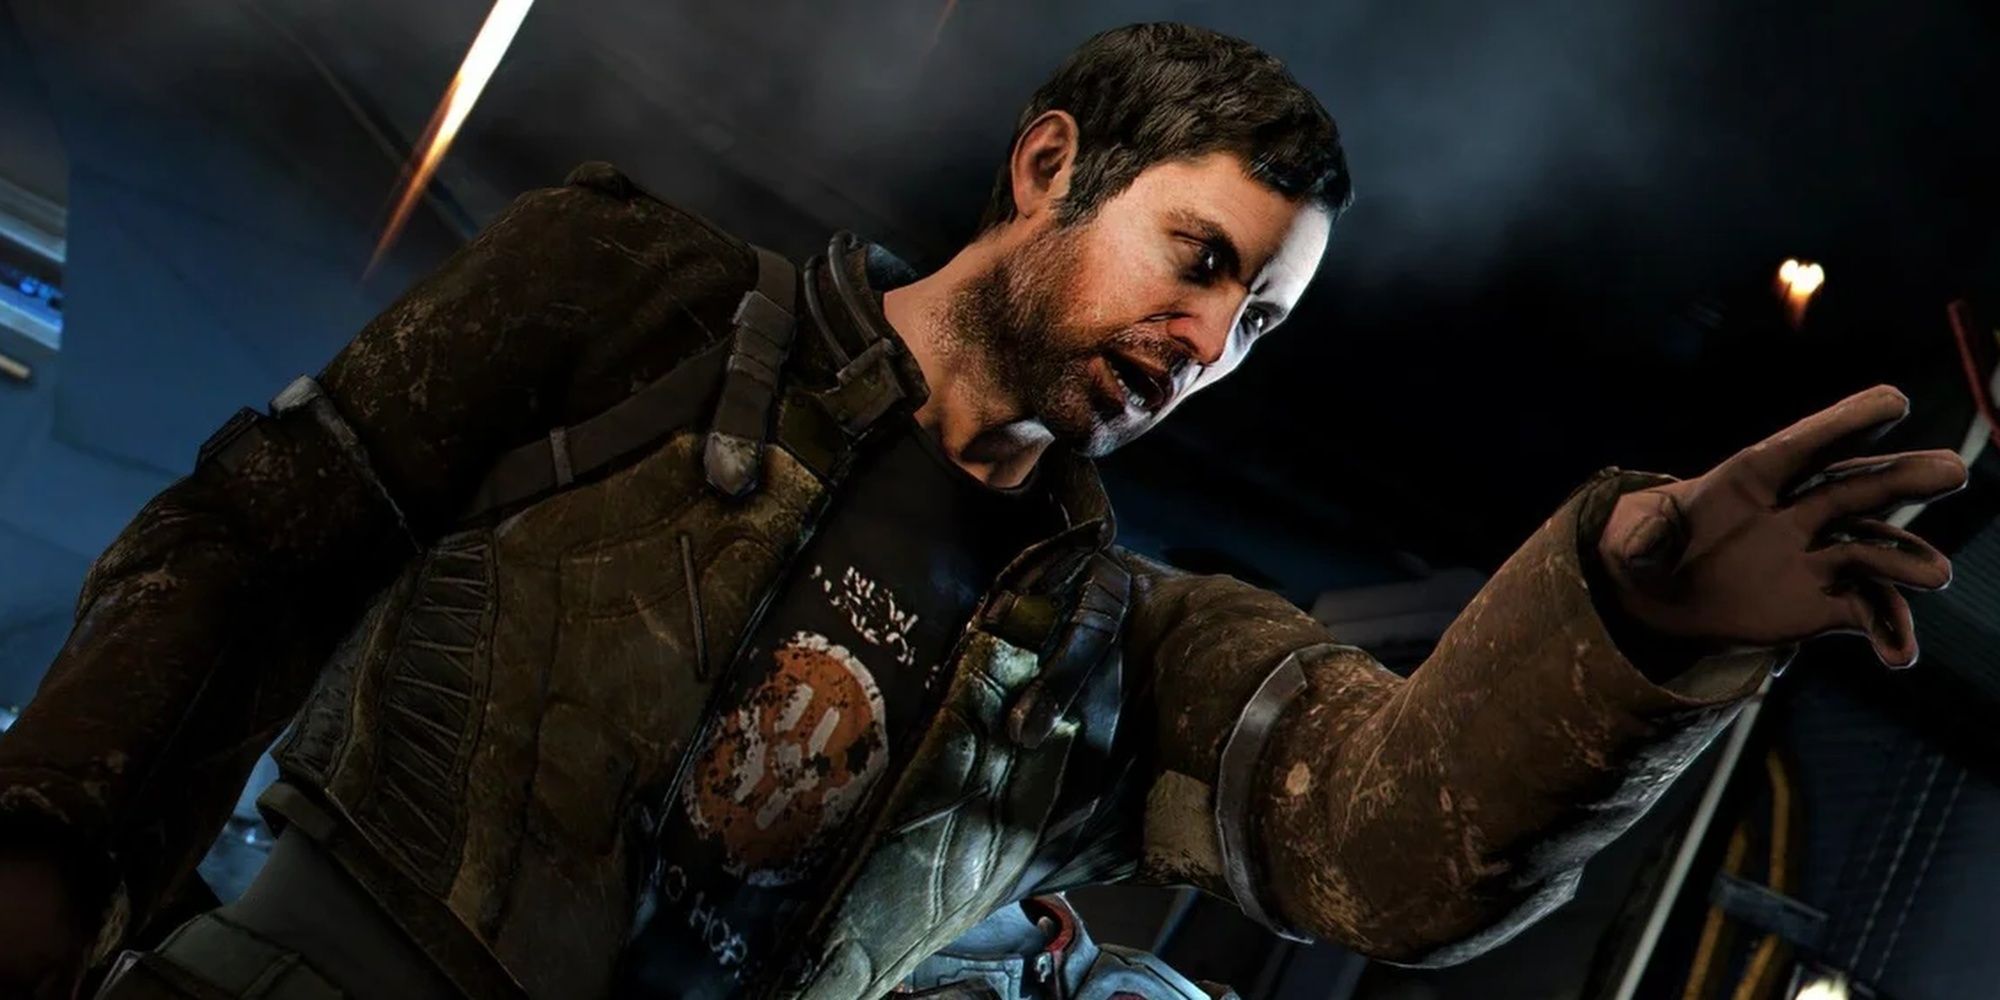 Dead Space 3: Isaac Clarke Without His Armor